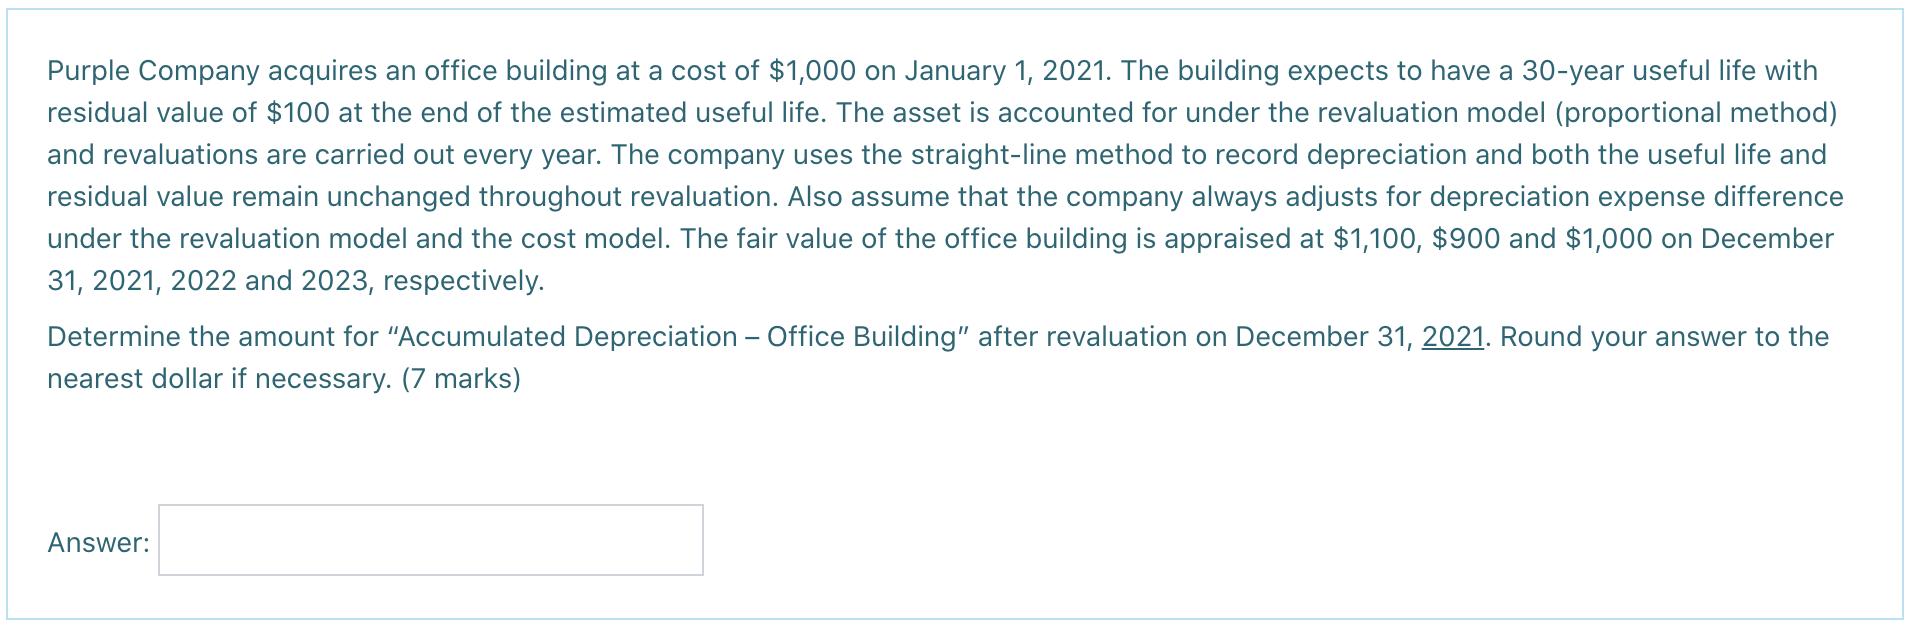 Purple Company acquires an office building at a cost of $1,000 on January 1, 2021. The building expects to have a 30-year use